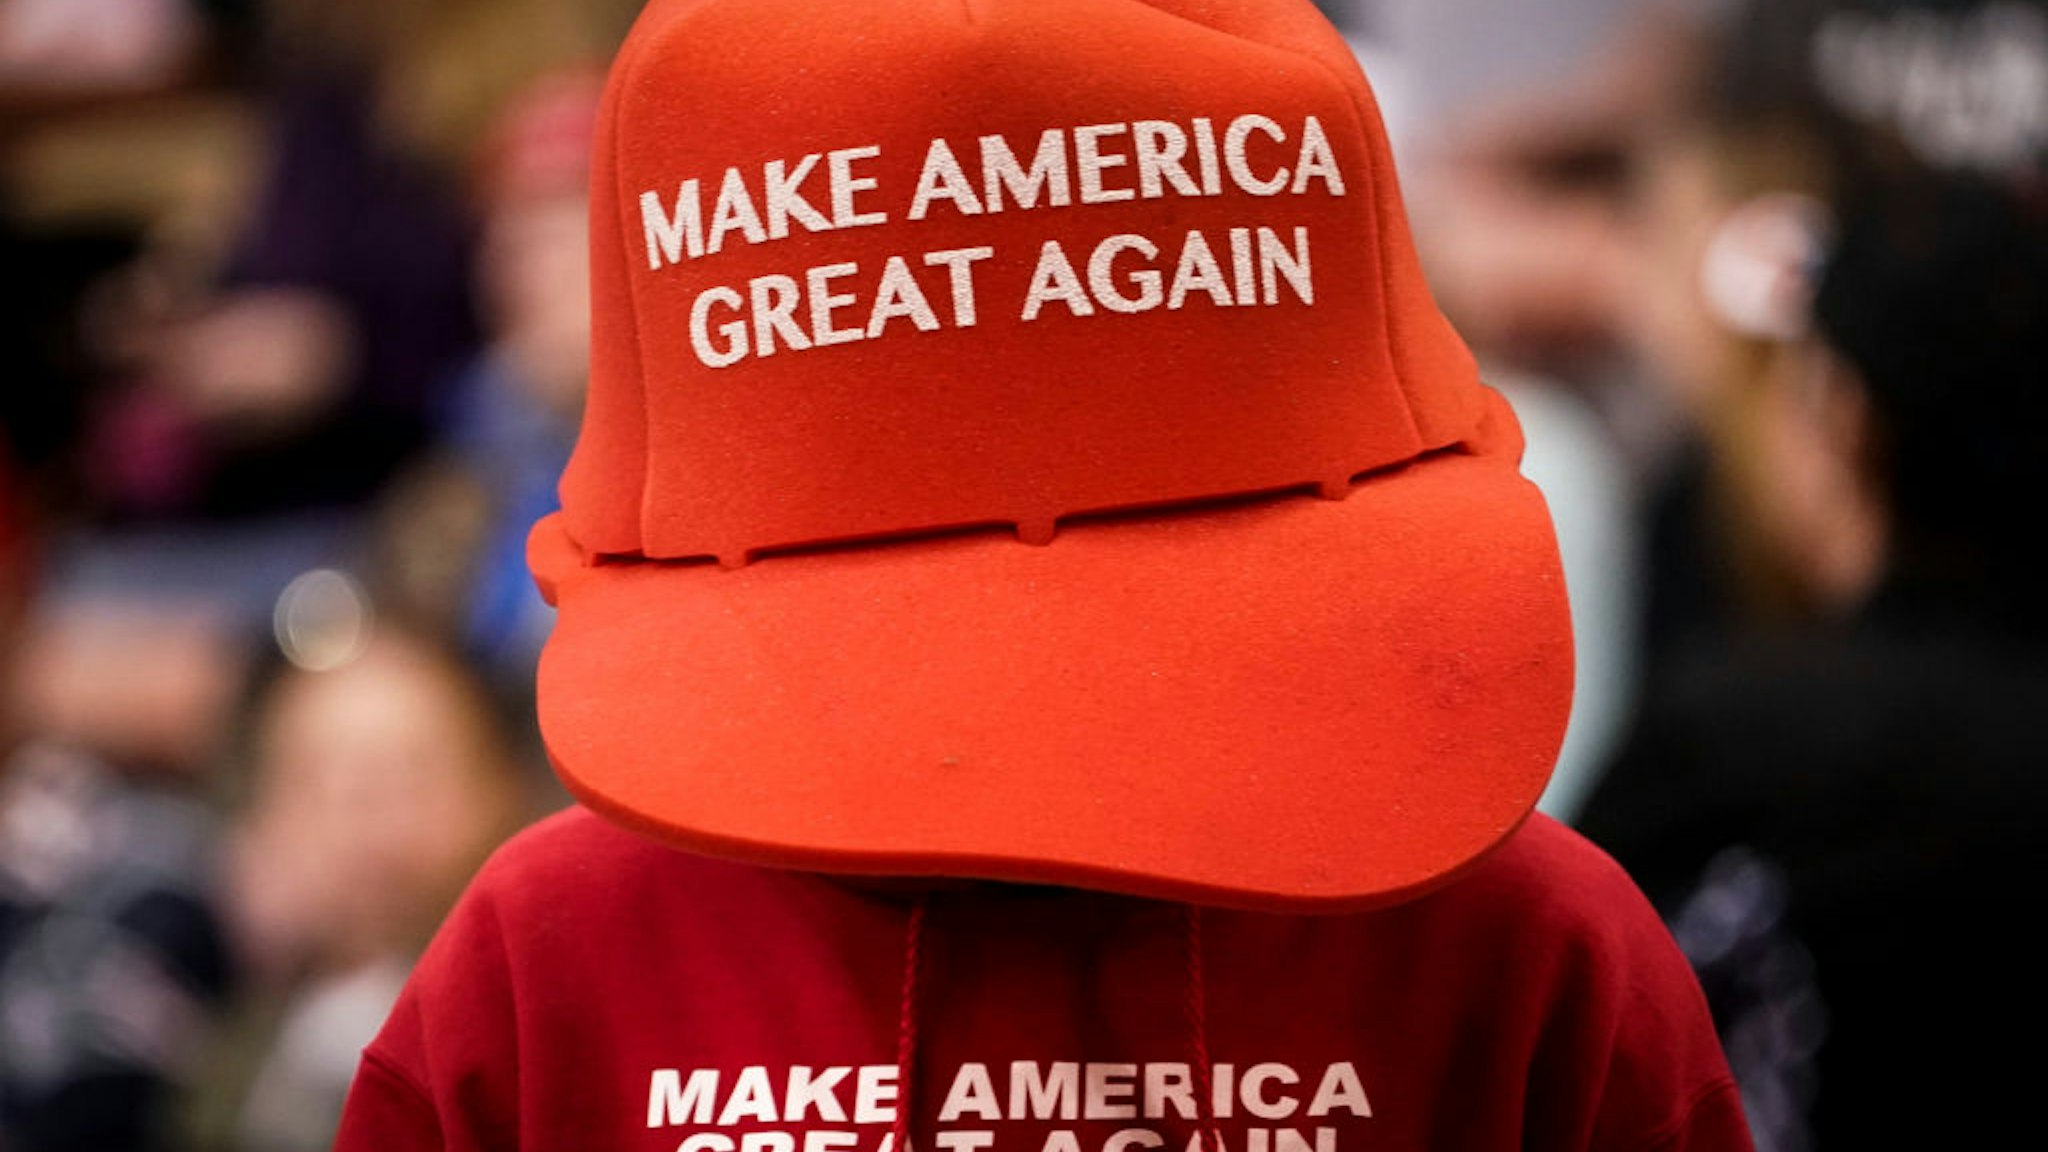 A supporter of U.S. President Donald Trump wears an oversize "Make America Great Again Hat" as he waits for the start of a "Keep America Great" rally at Southern New Hampshire University Arena on February 10, 2020 in Manchester, New Hampshire.